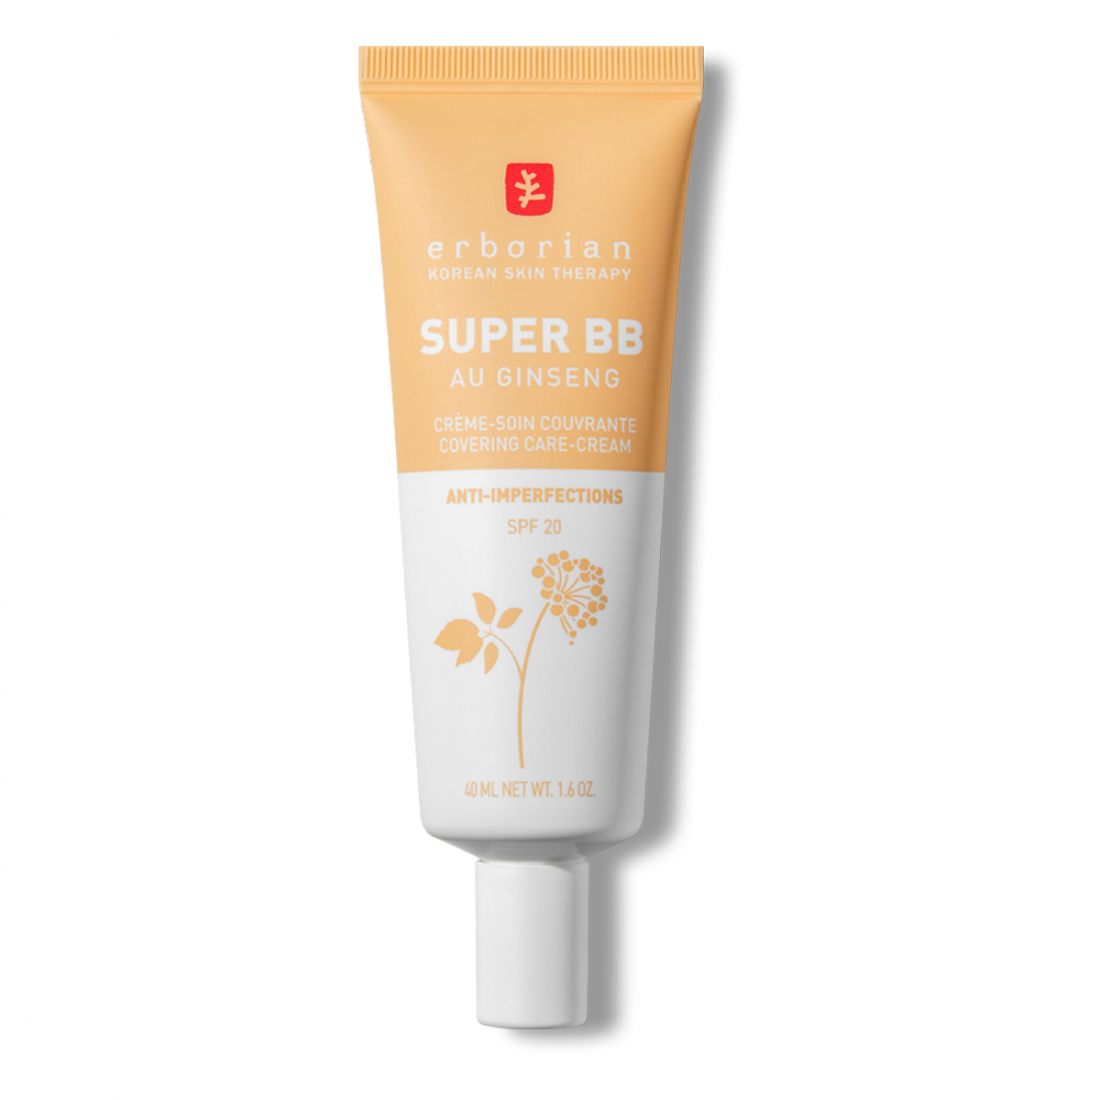 BB Crème 'Super BB au Ginseg Soin Couvrante Anti-Imperfections' - Nude 40 ml